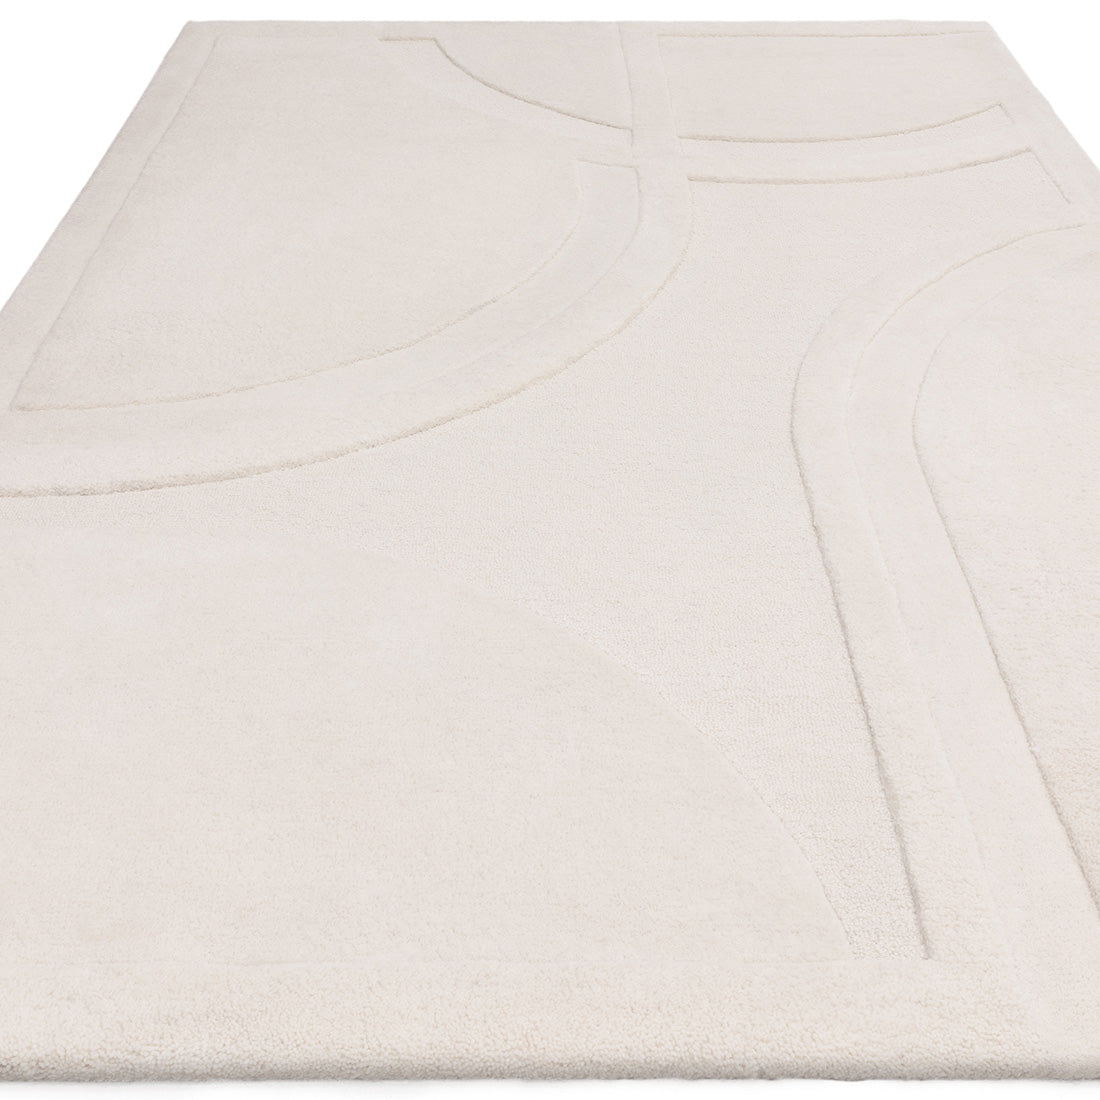 Modern rectangle cream rug with abstract cream pattern
